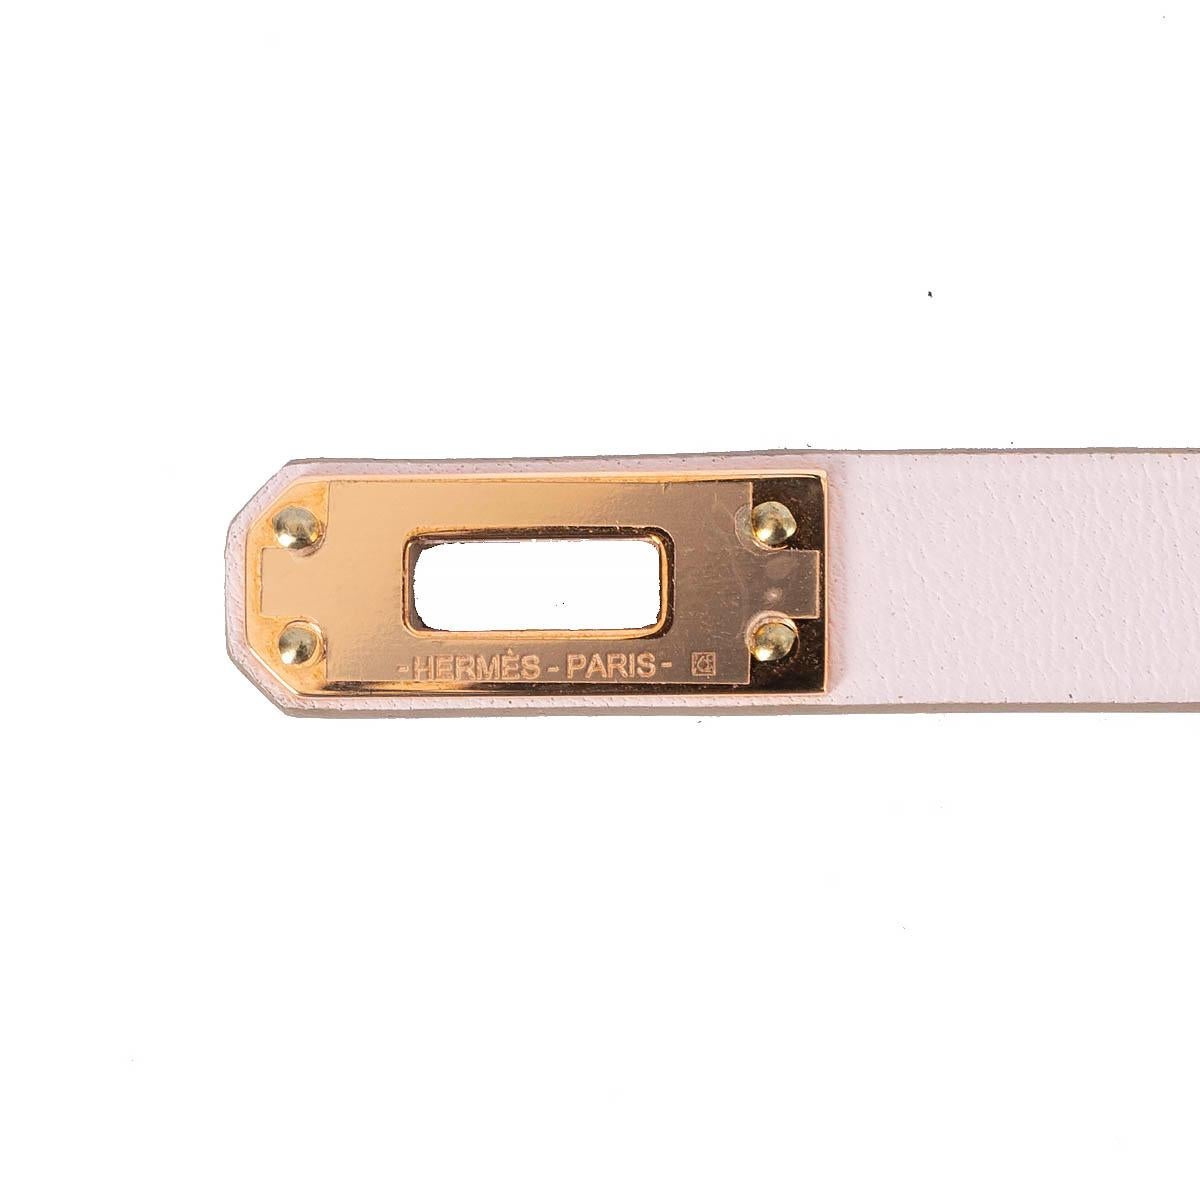 100% authentic Hermès Mini Kelly Double Tour bracelet in Mauve Pale pink Veau Swift leather with rose gold-plated mini Kelly turnlock closure. Brand new with box.

Measurements
Model	H081182CD09T2
Tag Size	T2
Width	1cm (0.4in)
Length	35cm